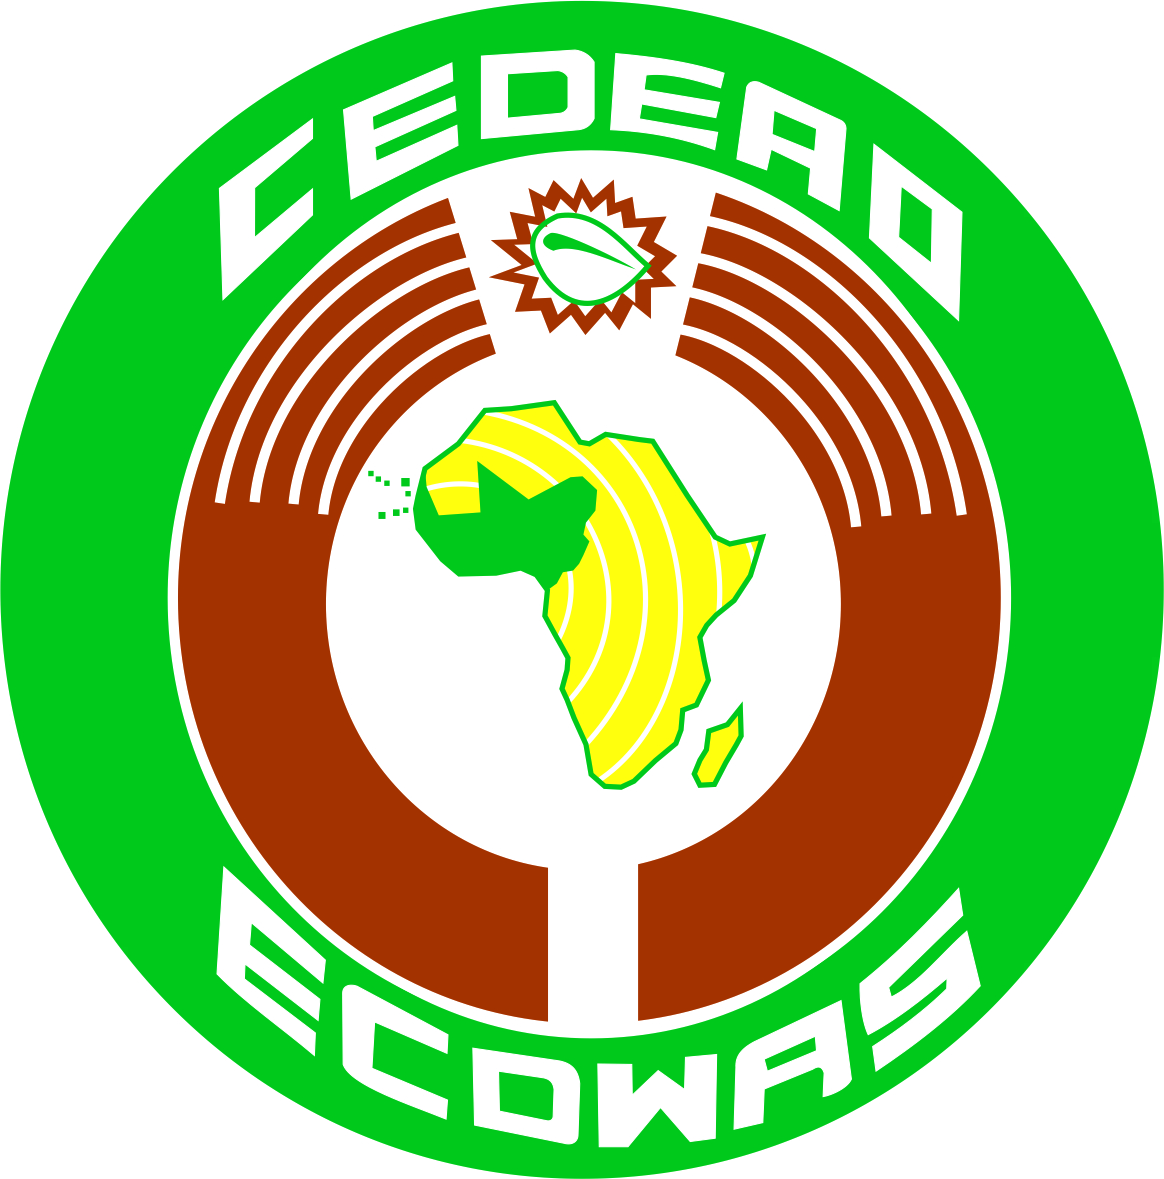 Competition Experts met in Dakar to review the draft Economic Community of West African States (ECOWAS) Directive on Consumer Protection